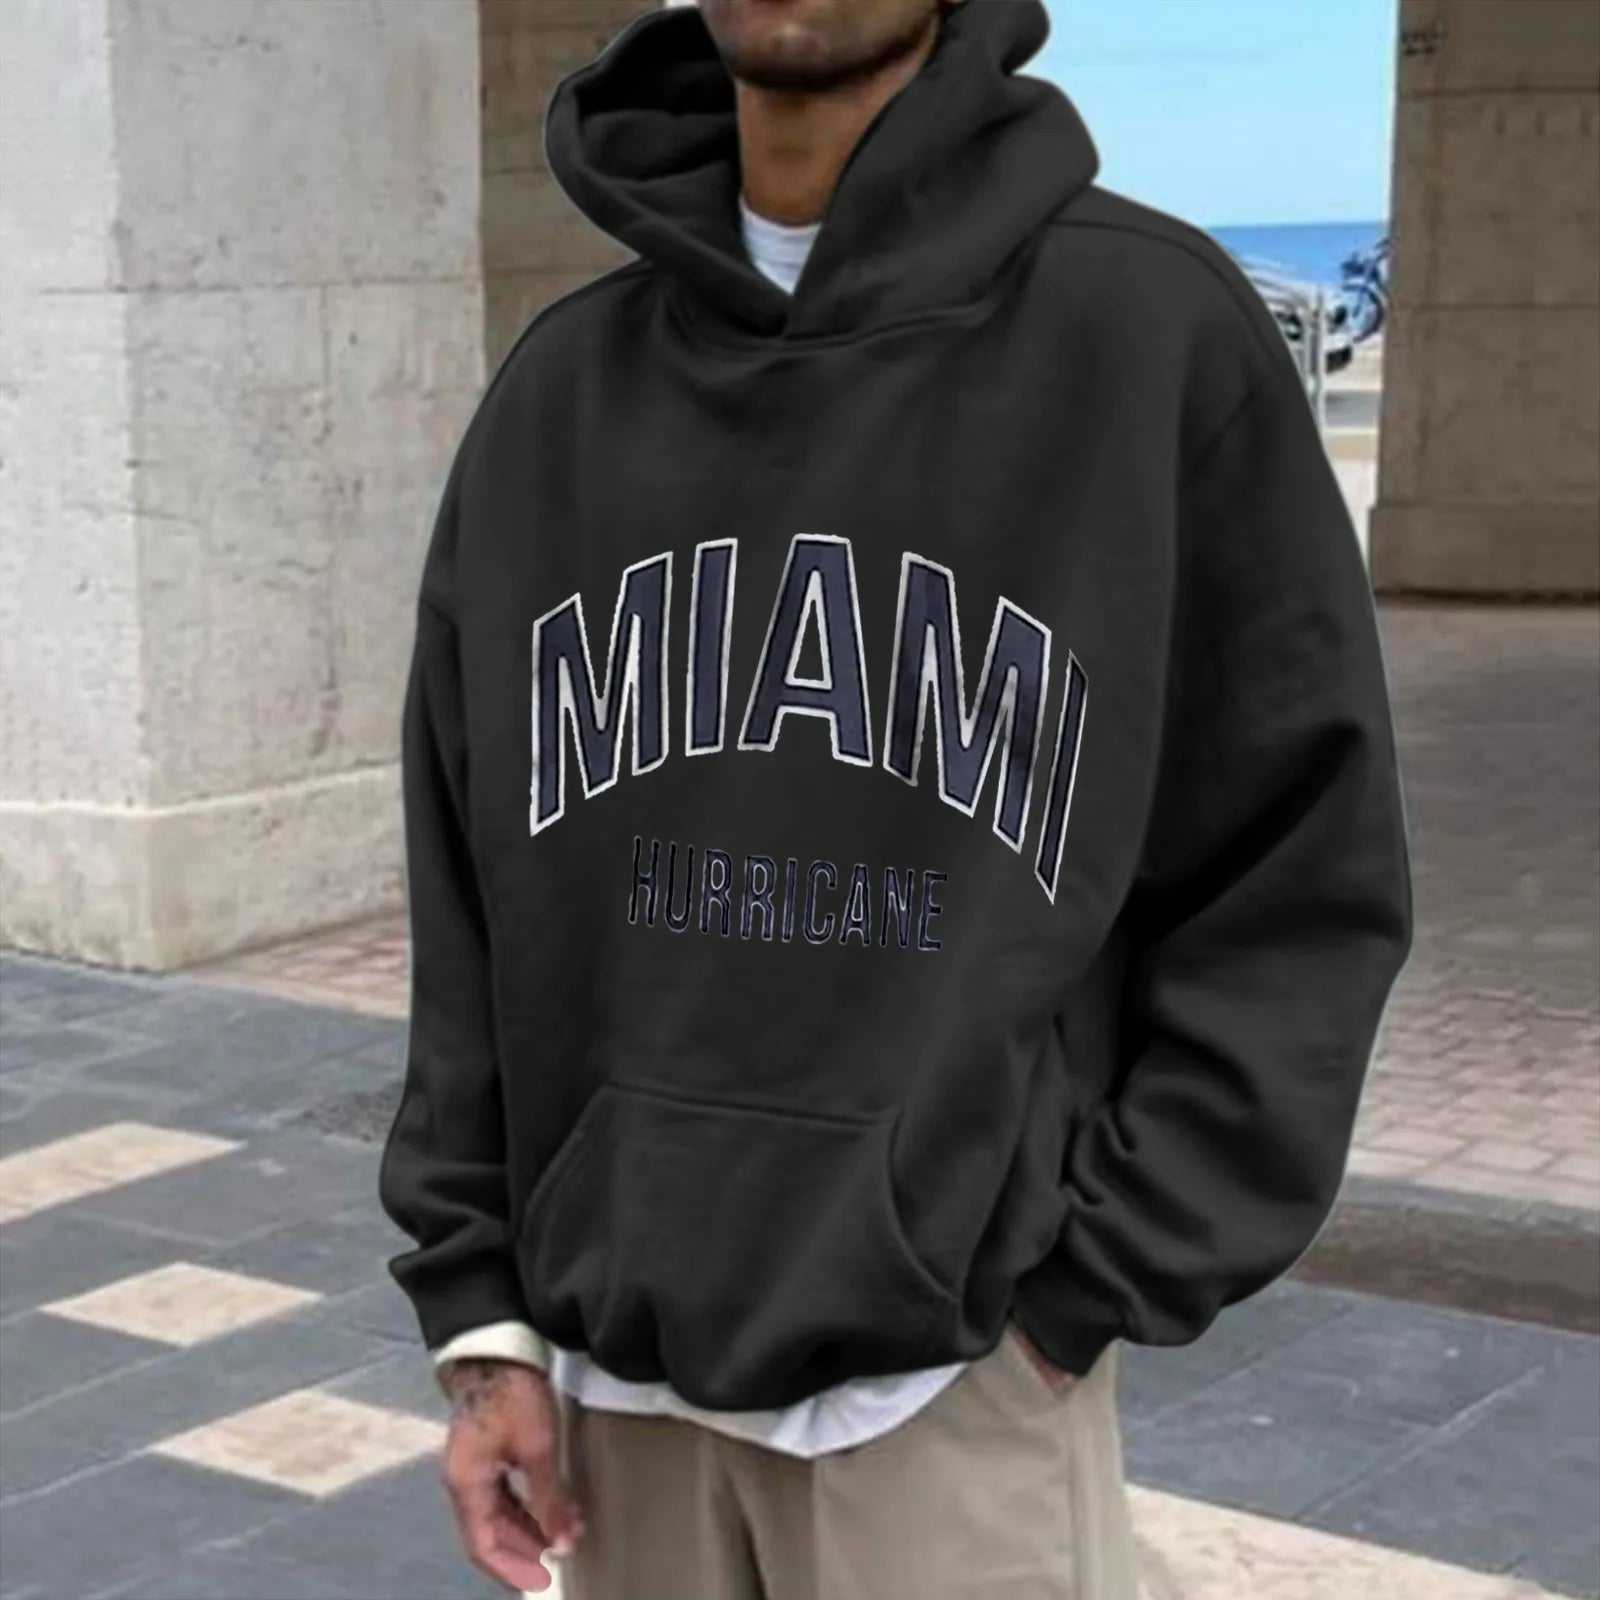 2024 Miami Letter Printed Hoodies For Men Streetwear 20 Ryan fashion product Ryan fashion product 14:771#Beige;200007763:201336106;5:4183#XXXL 20 $ Ryan fashion product